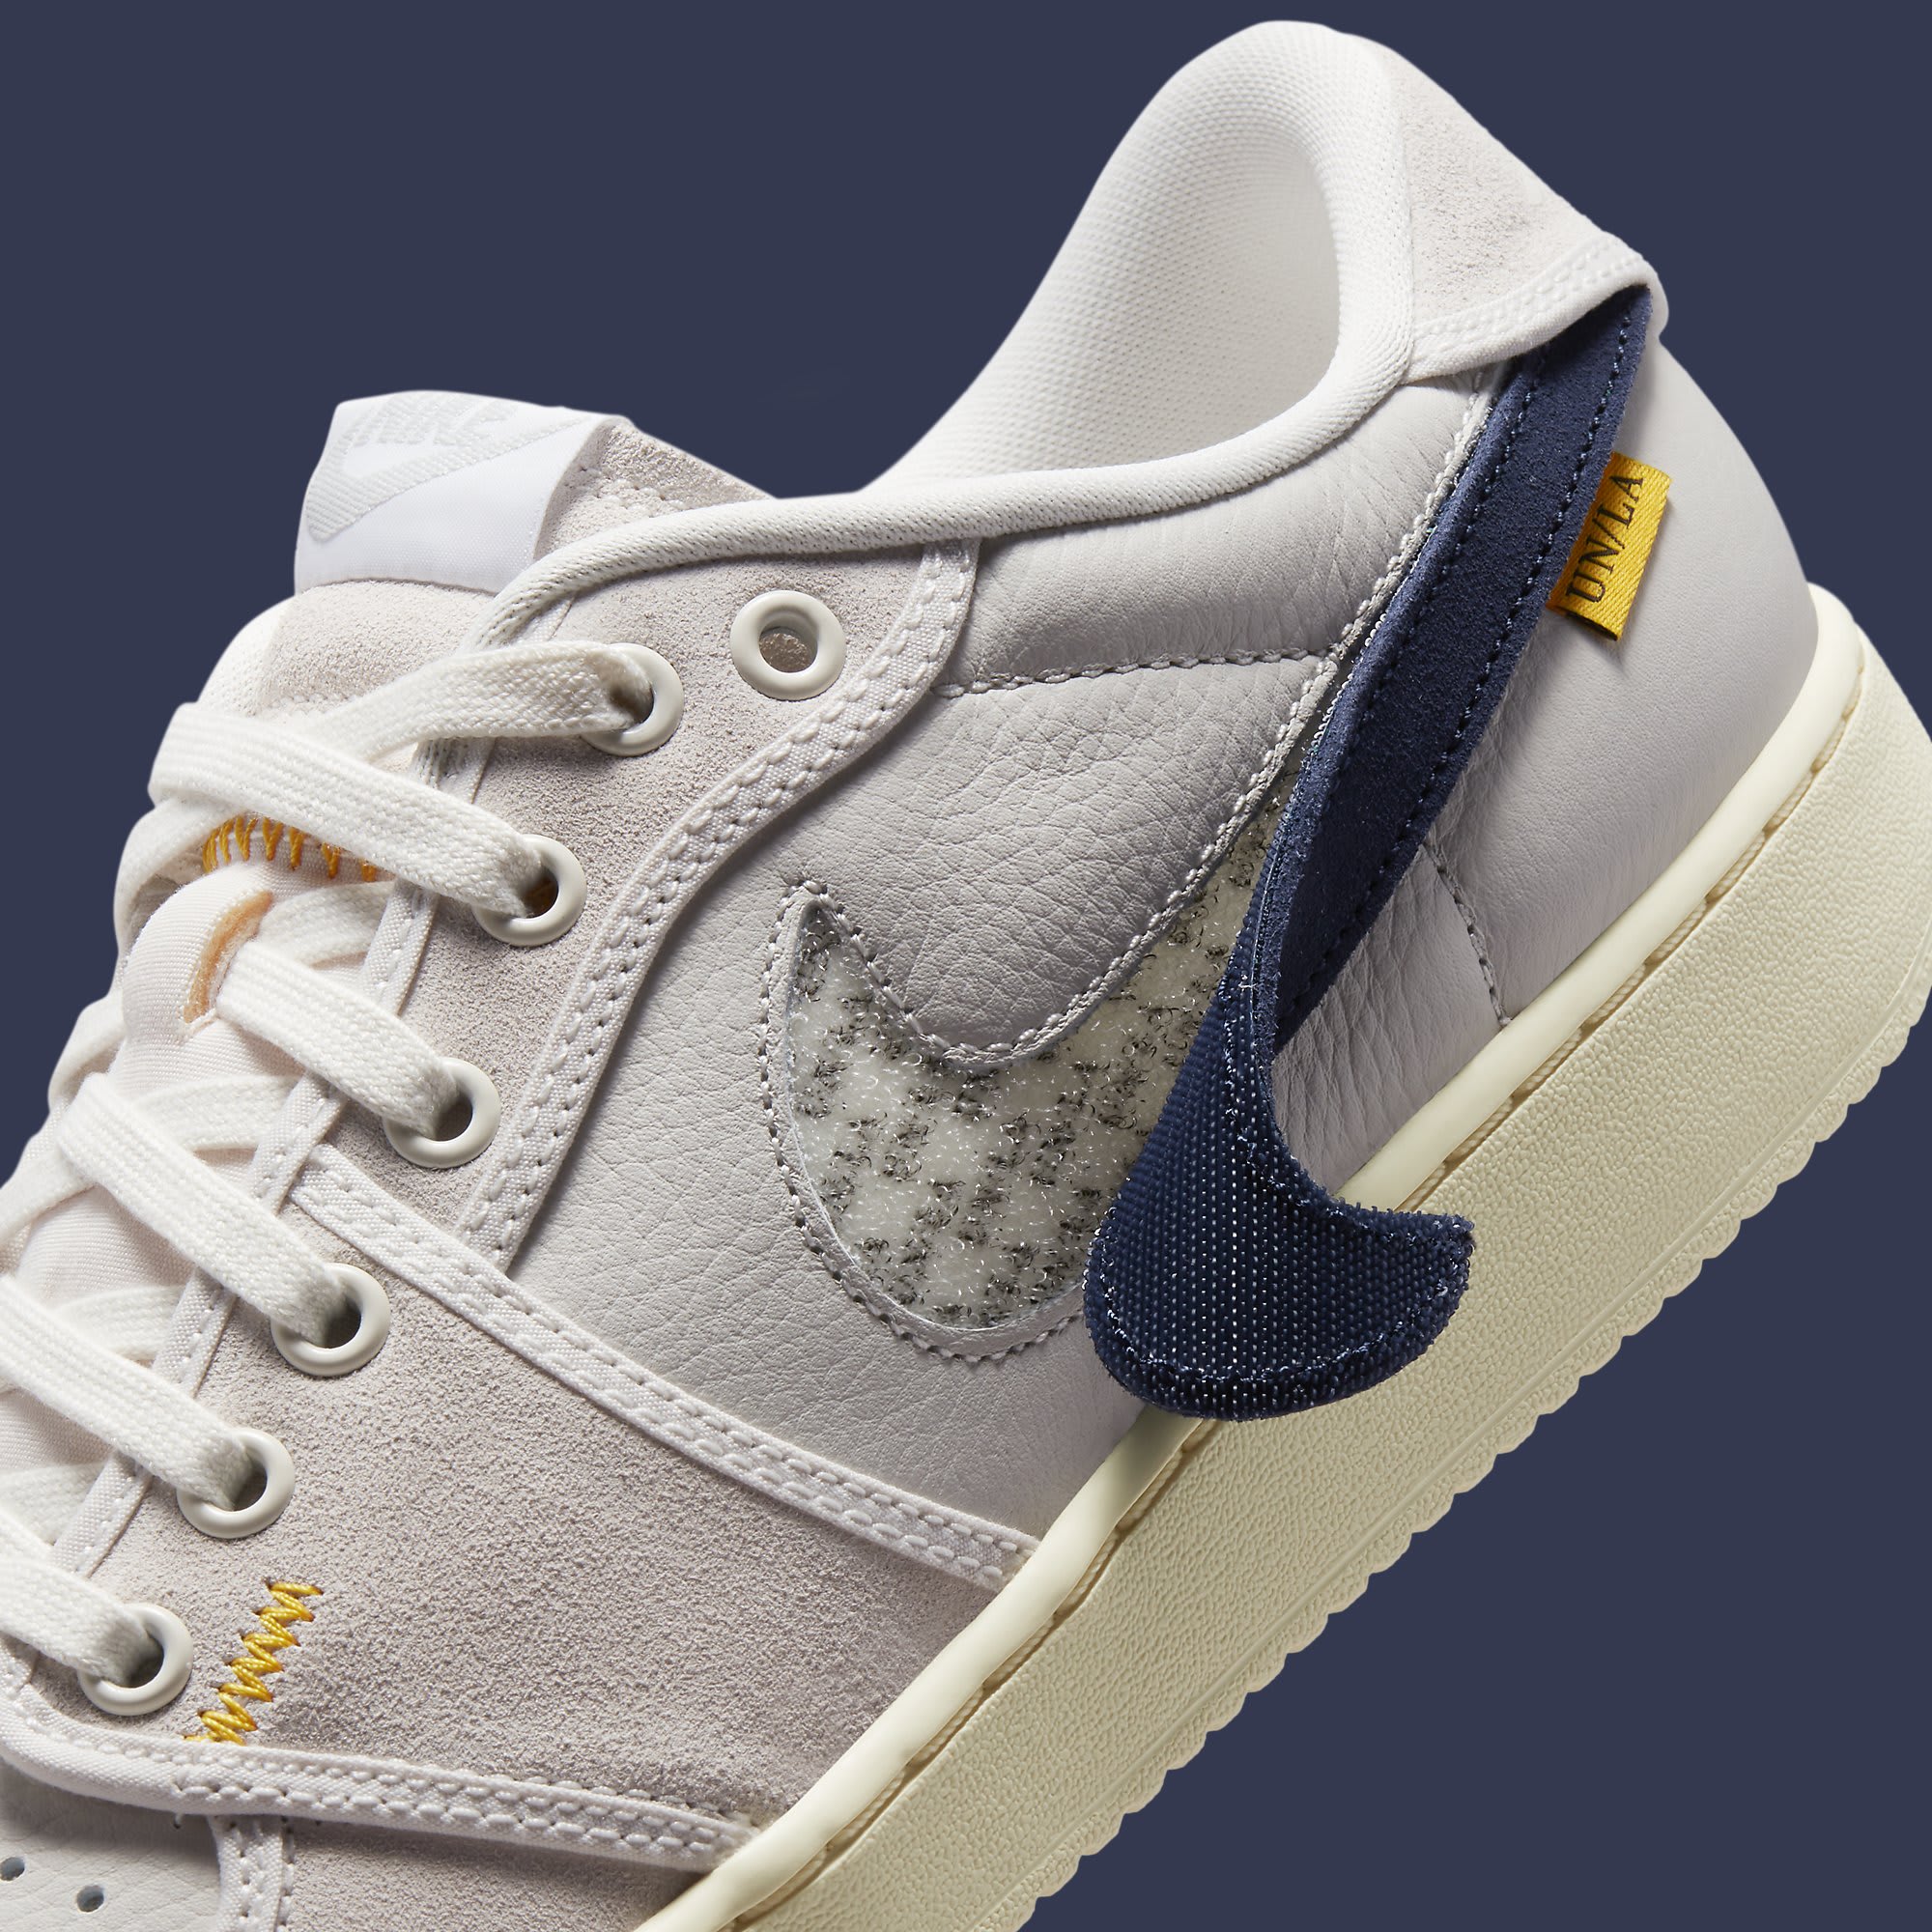 Official Look at Union's Air Jordan 1 KO Low Collab | Complex